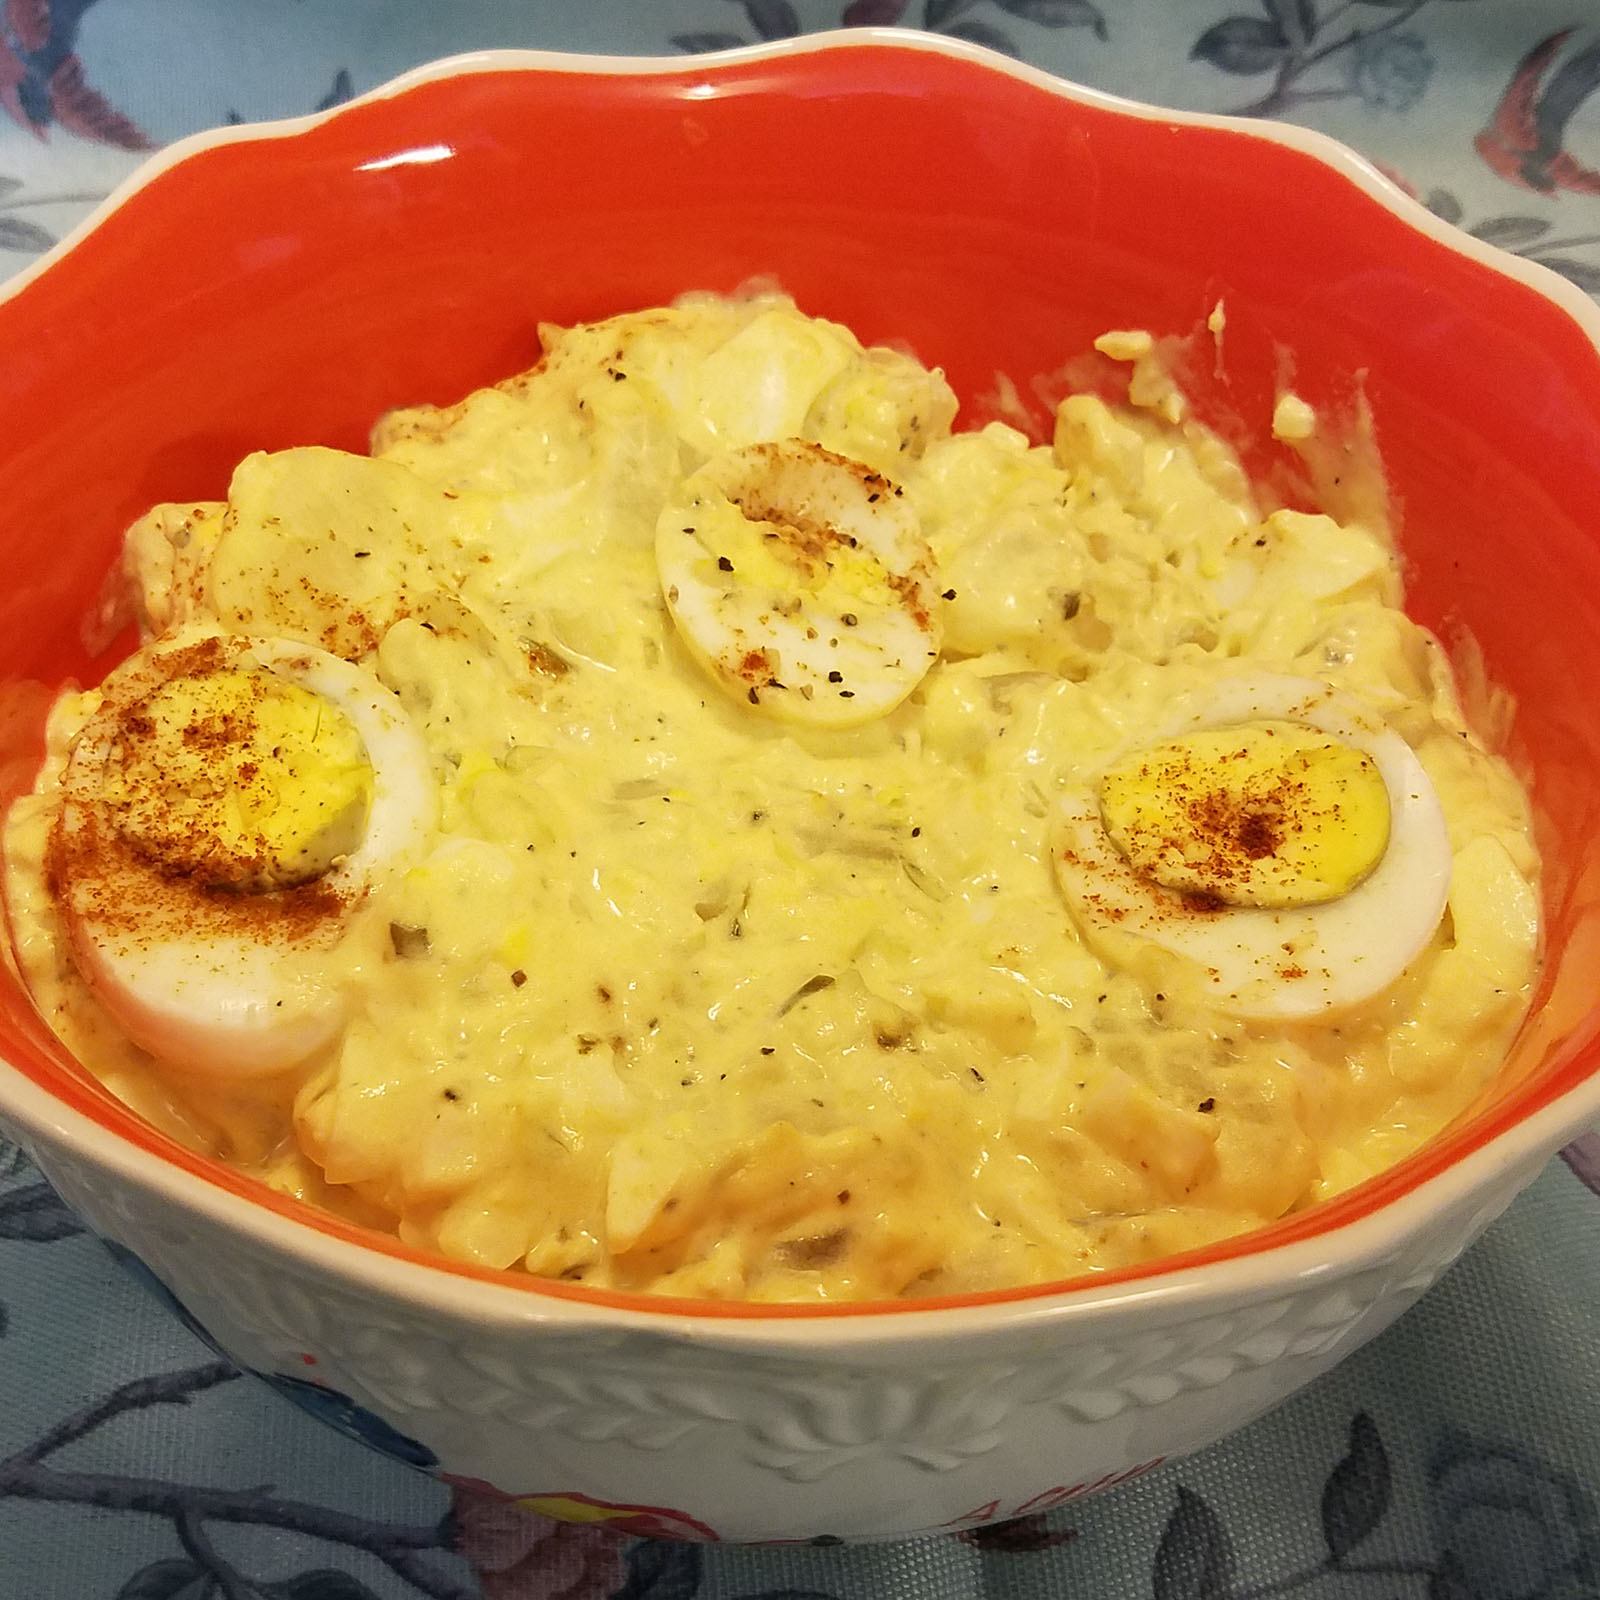 Looking for the Best Southern-style potato salad that's easy and quick to make? Look no further than Aunt Sandy's Kitchen! This recipe also includes How To's for cooking potatotes and hard boil eggs.